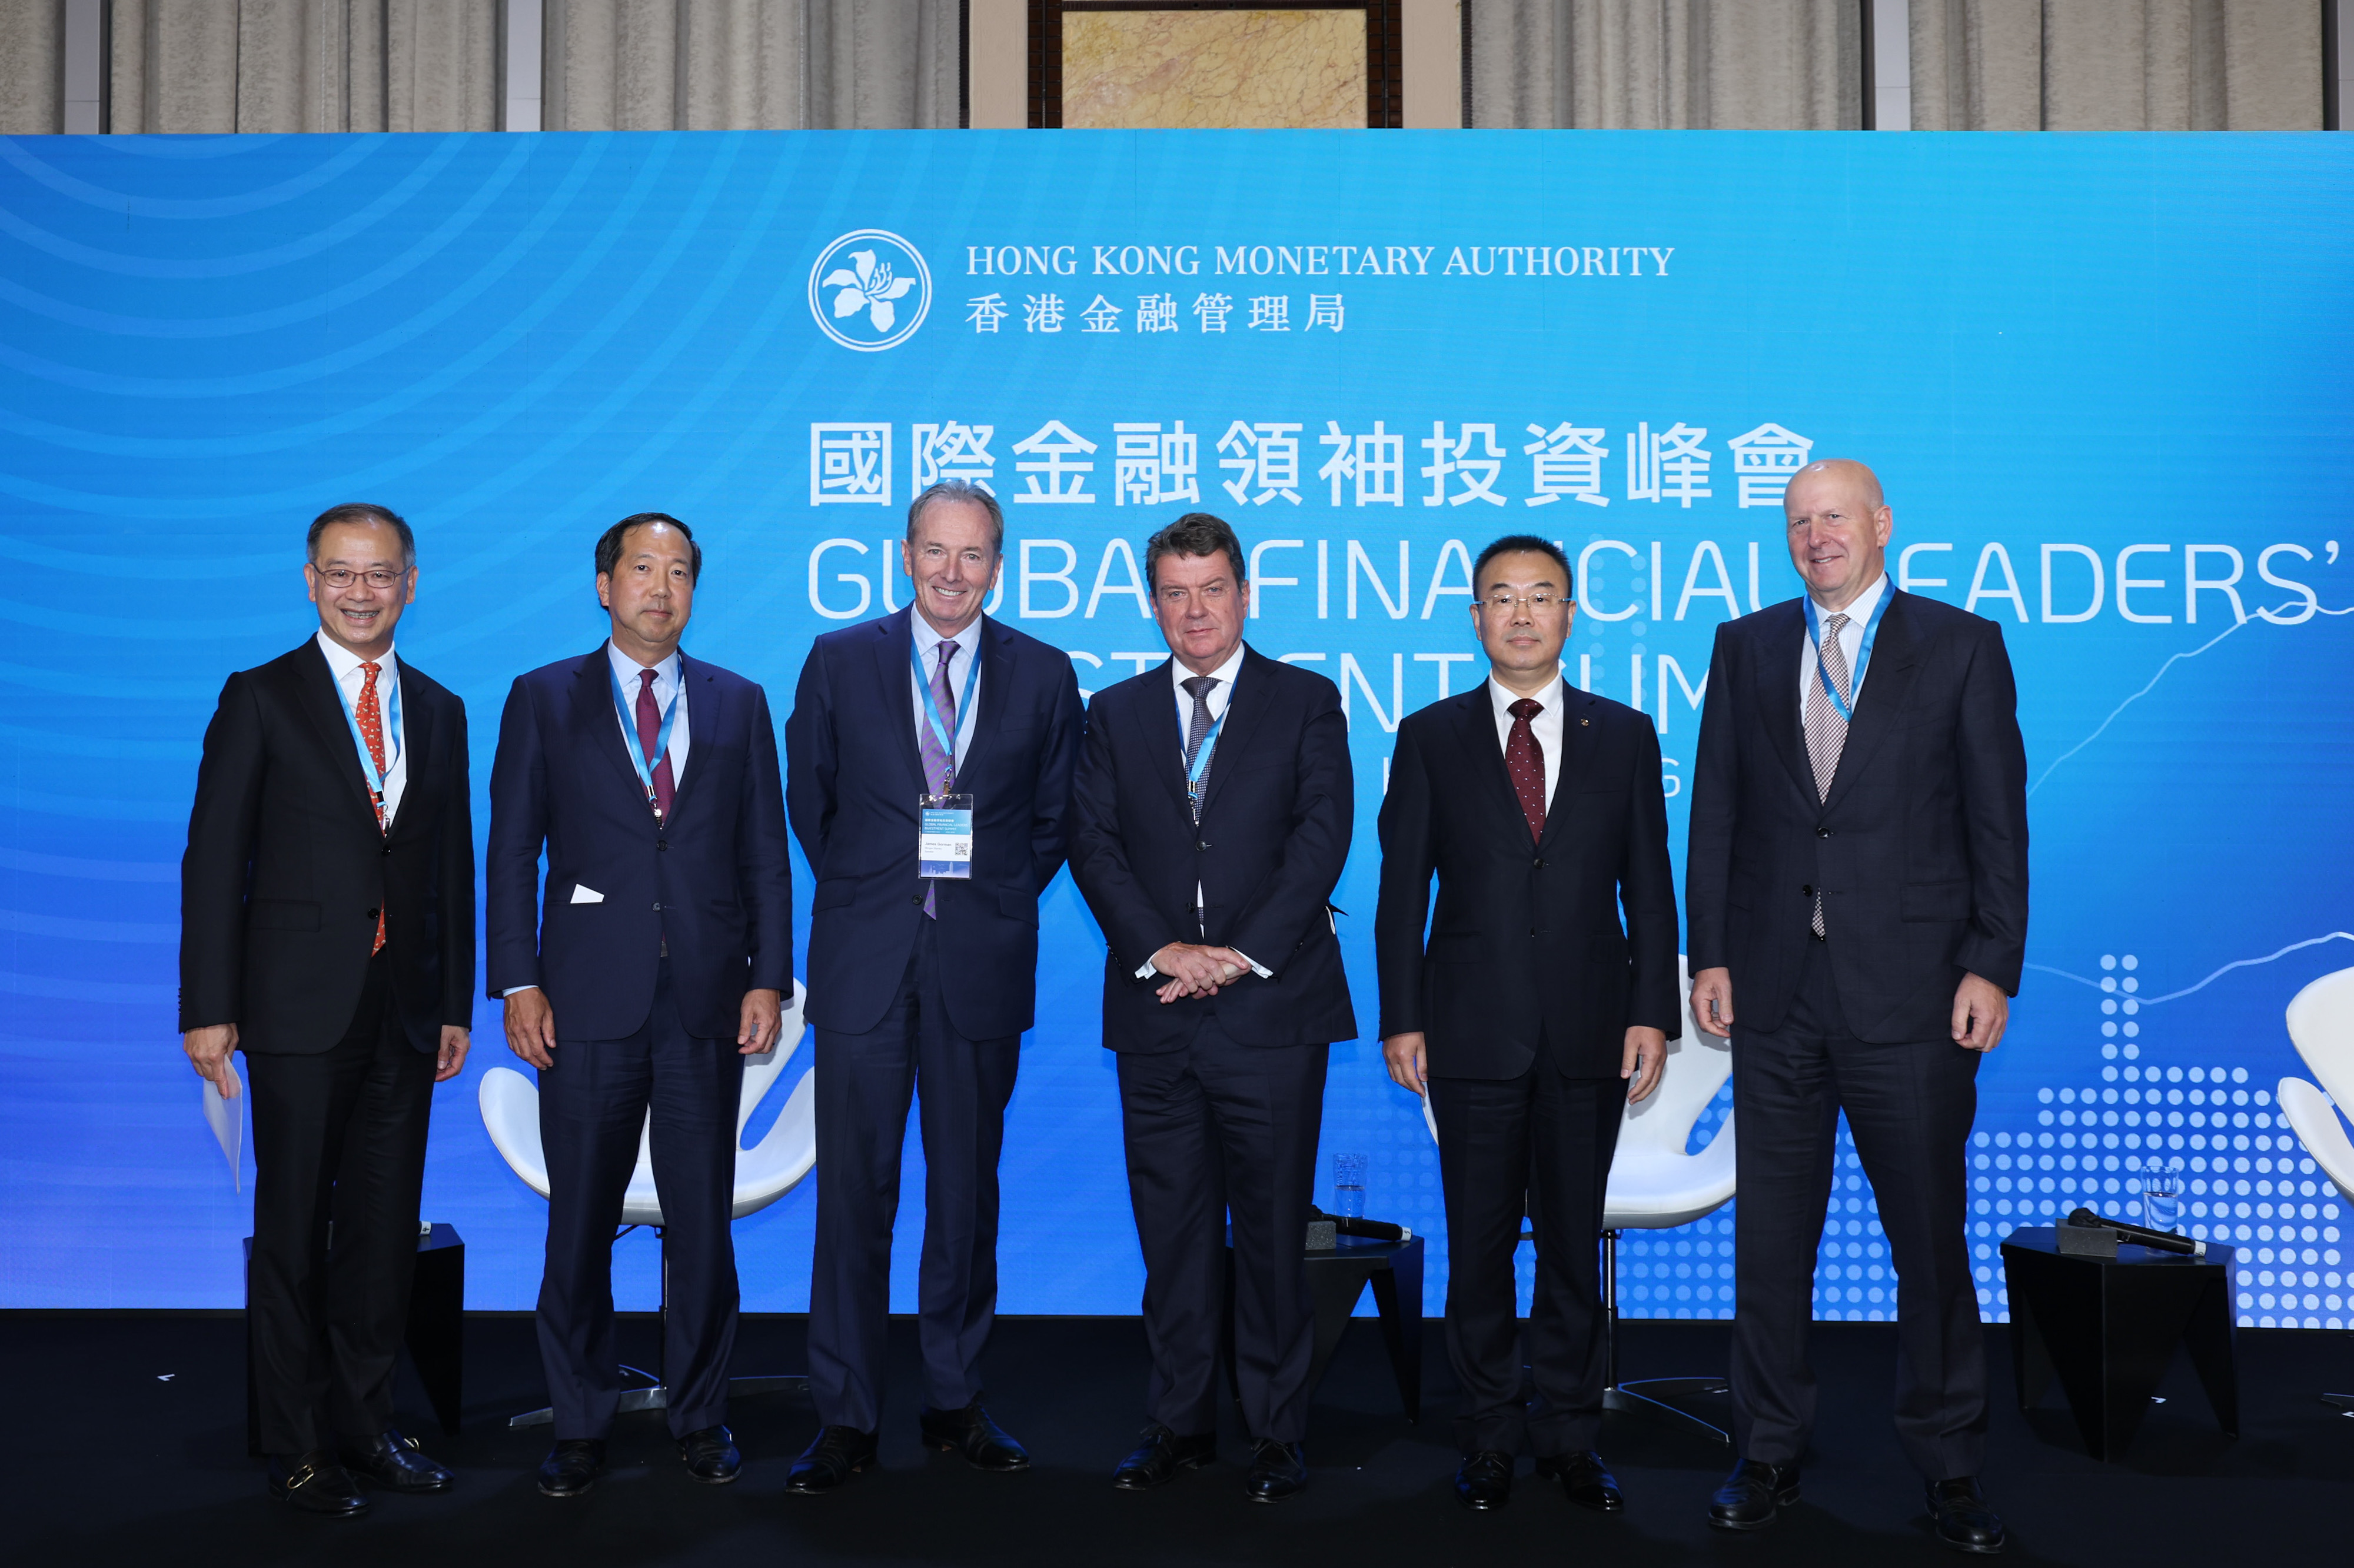 (From left to right) Eddie Yue, Chief Executive of the Hong Kong Monetary Authority; Michael Chae, Chief Financial Officer and Senior Managing Director of Blackstone; James Gorman, Chairman and Chief Executive Officer of Morgan Stanley; Colm Kelleher, Chairman of UBS Group AG; LIU Jin, President of Bank of China; David Solomon, Chairman and Chief Executive Officer of Goldman Sachs